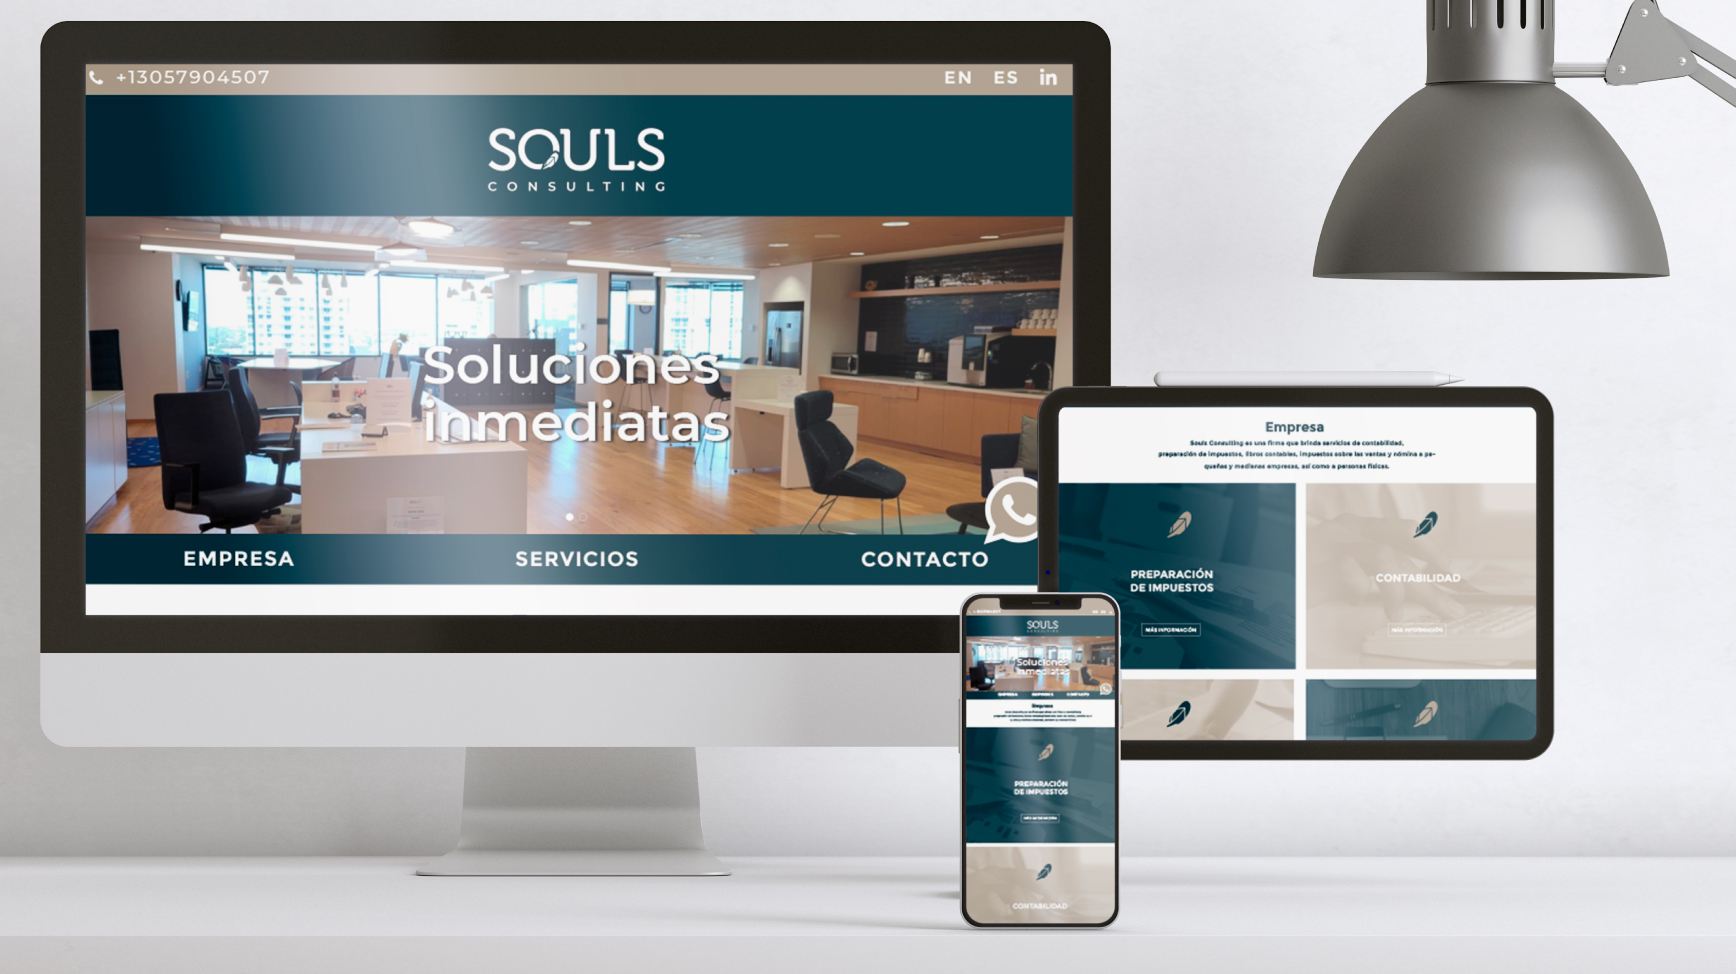 Souls Consulting